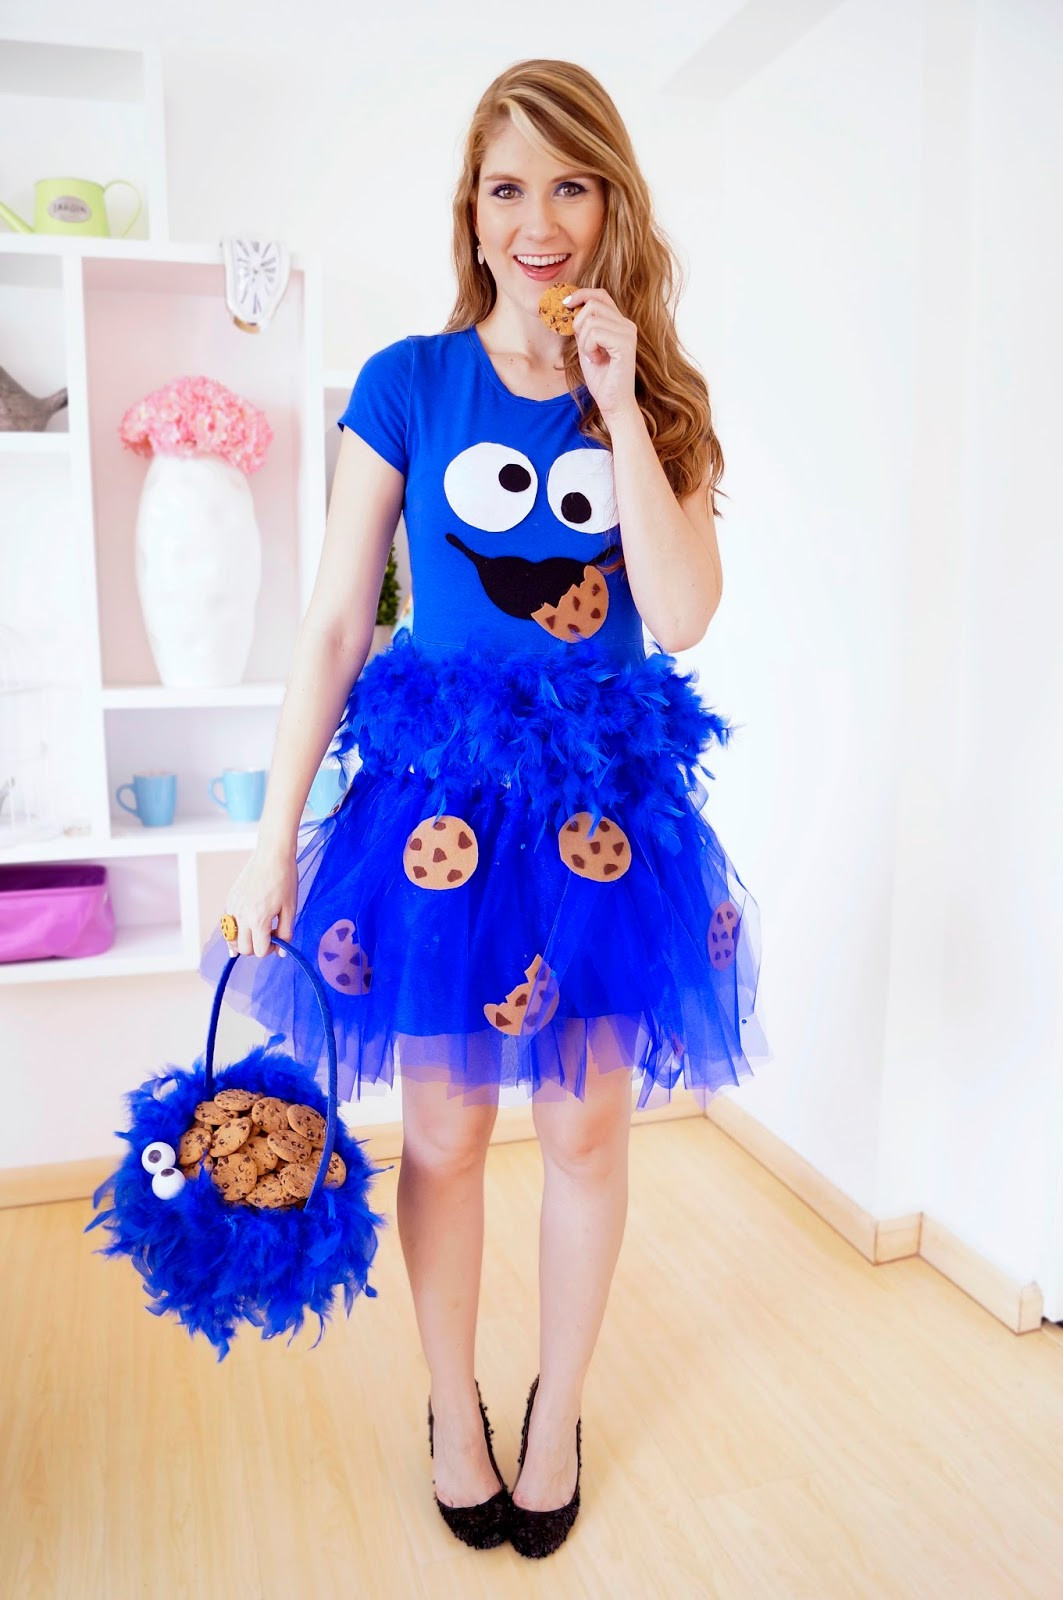 DIY Cookie Monster Costume
 The 15 Best DIY Halloween Costumes for Adults